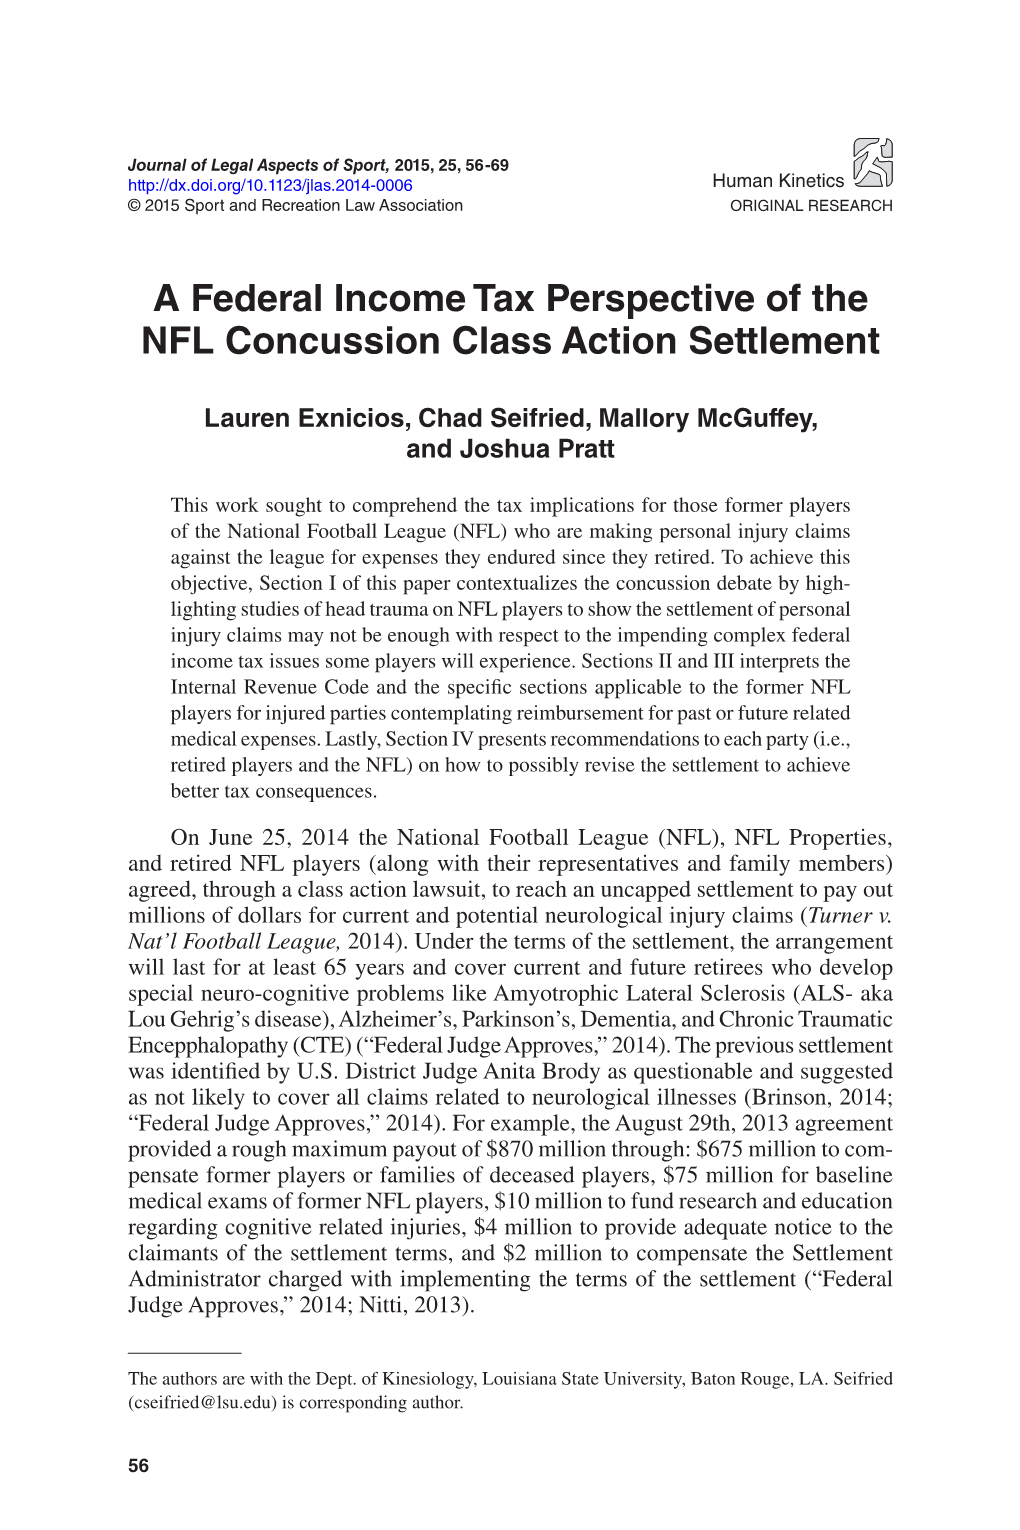 A Federal Income Tax Perspective of the NFL Concussion Class Action Settlement